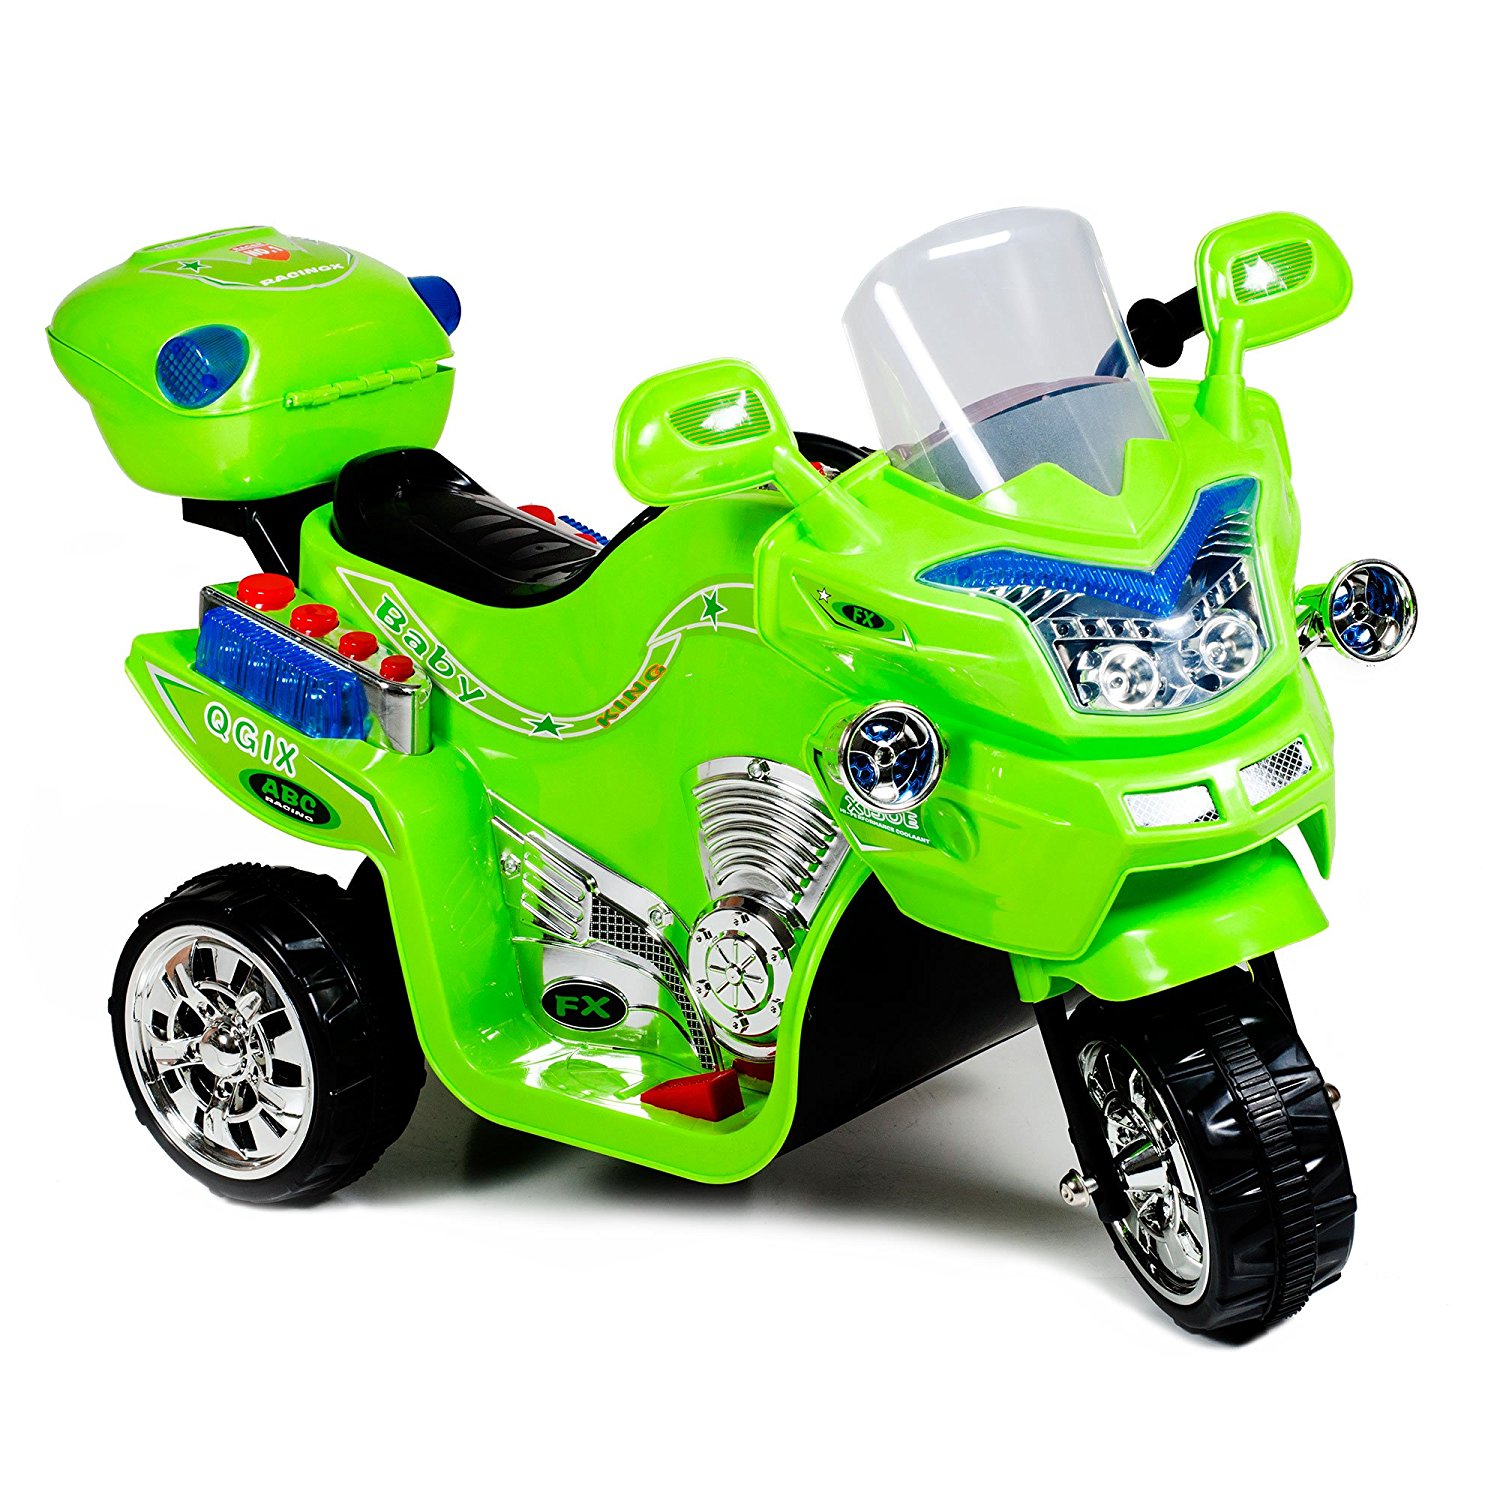 Amazon.com: Ride on Toy, 3 Wheel Motorcycle for Kids, Battery ...